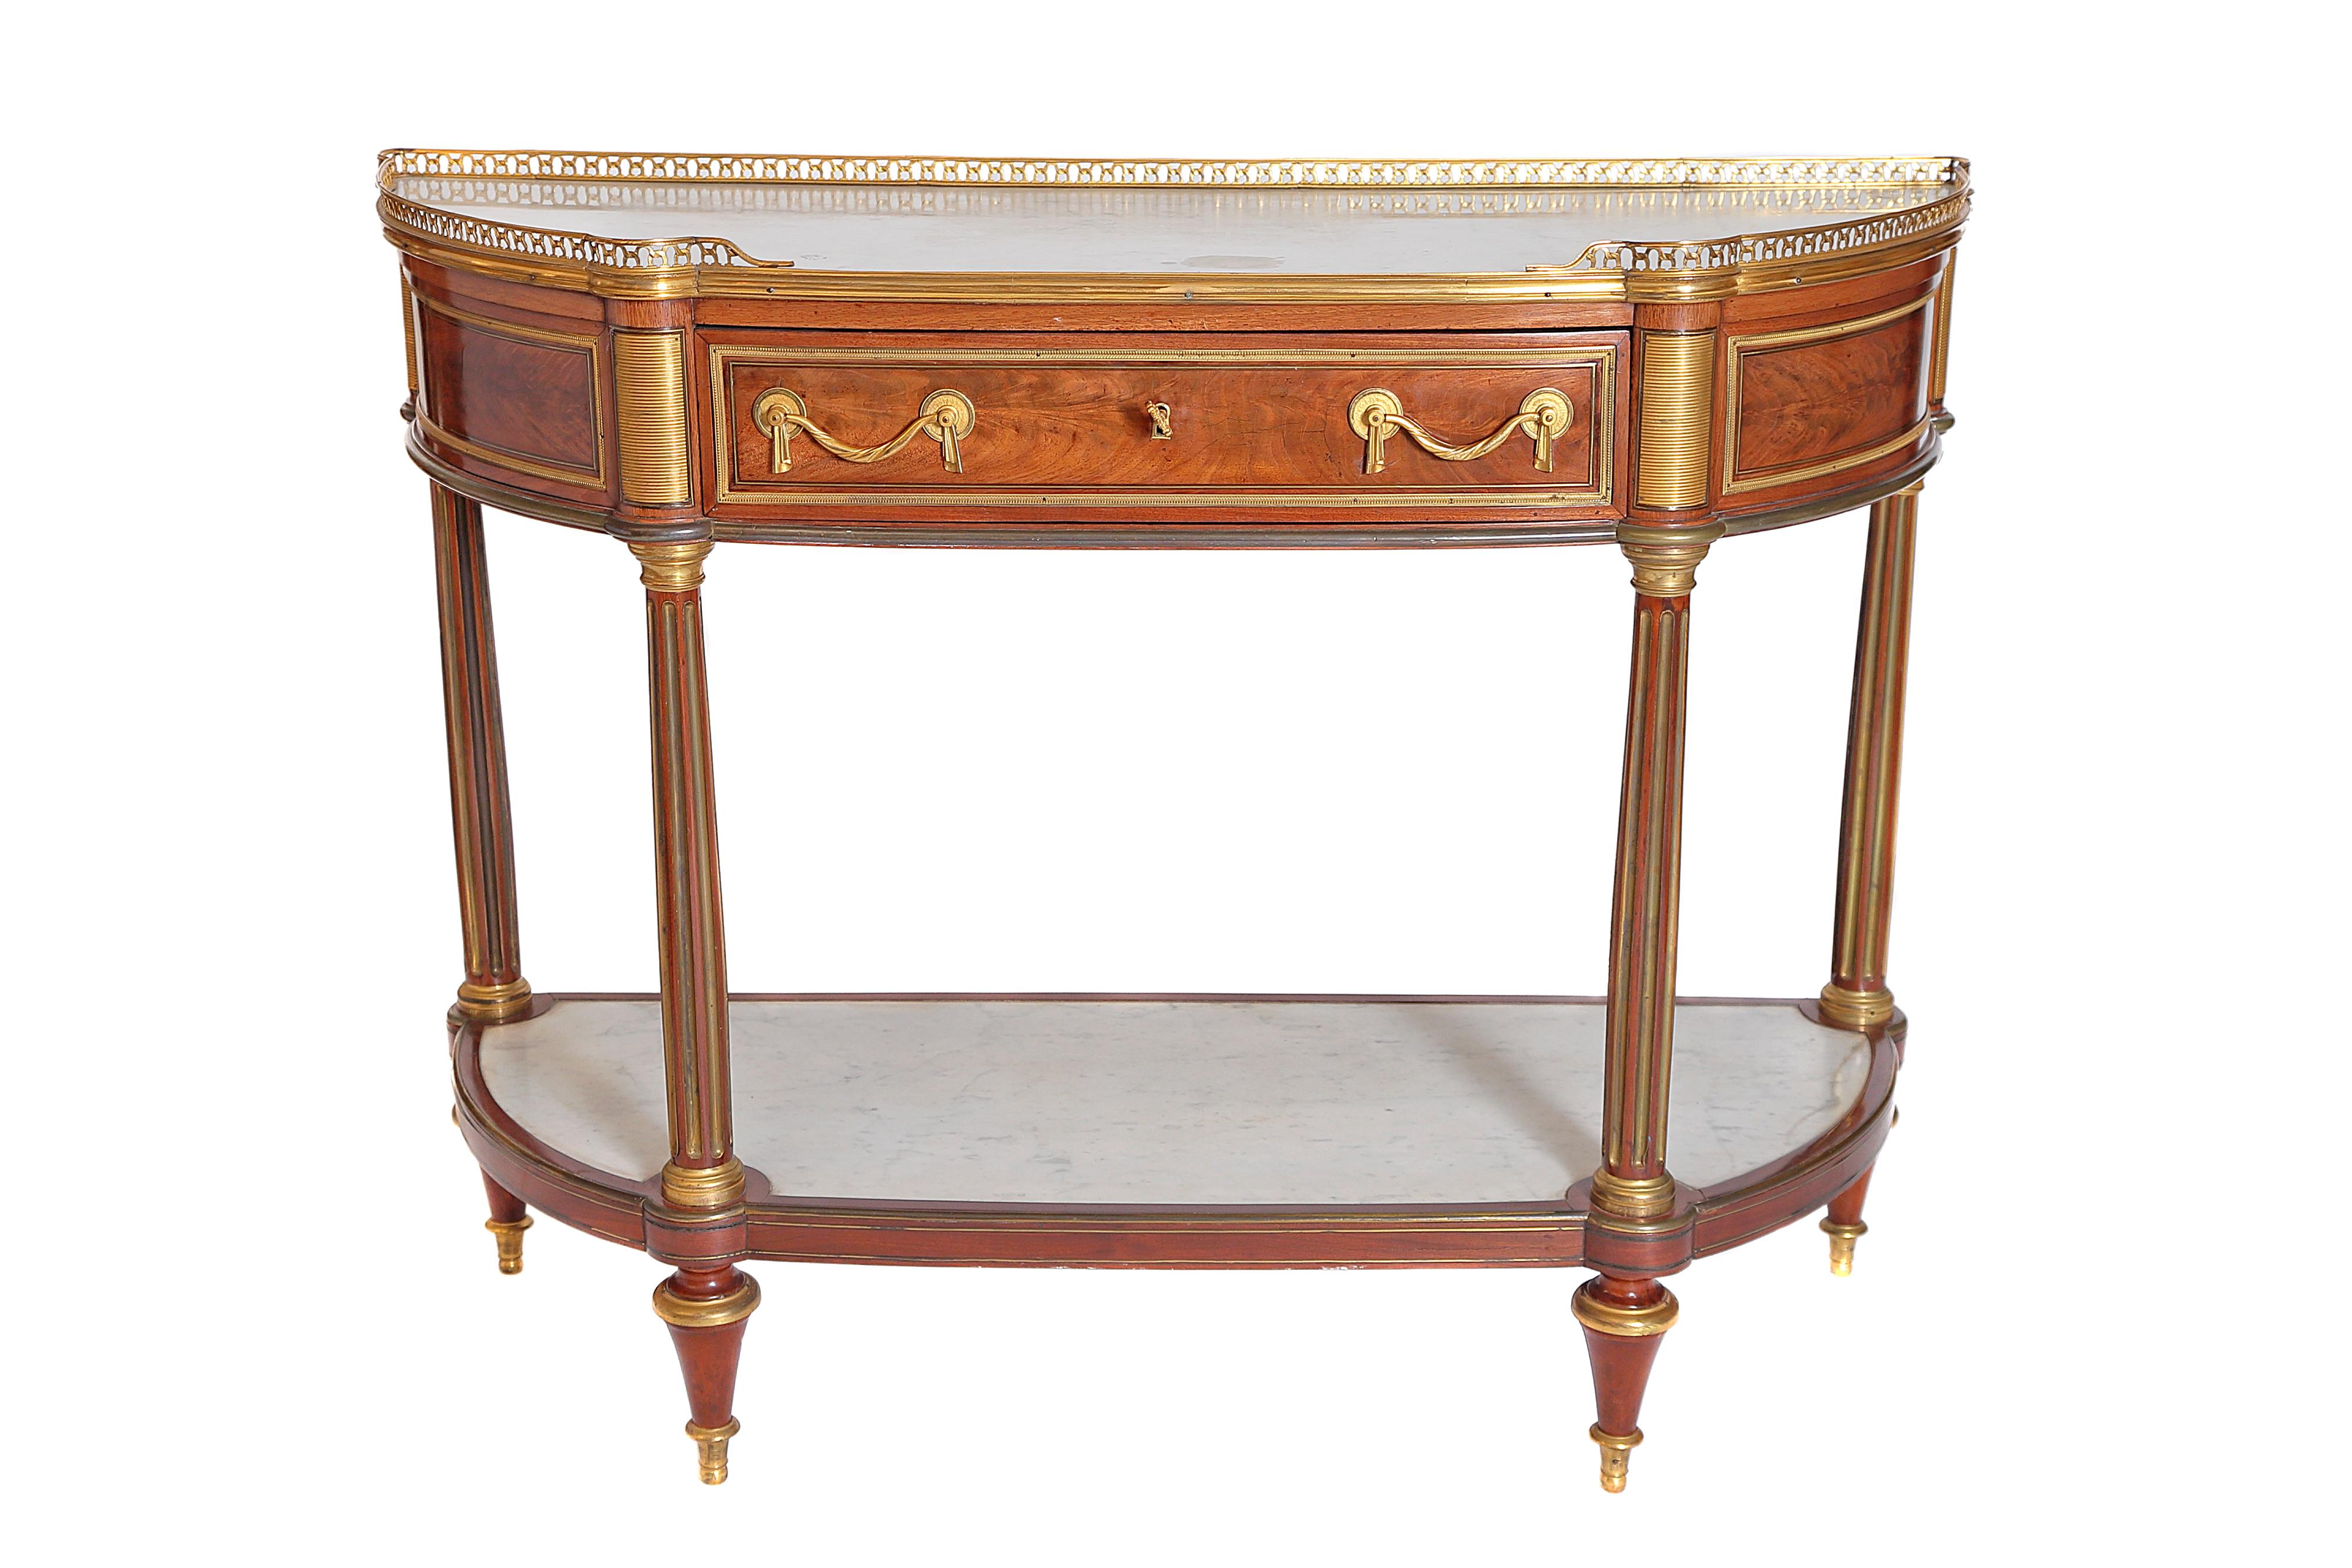 A Louis XVI ormolu and white marble mounted flame mahogany console desserte, stamped 